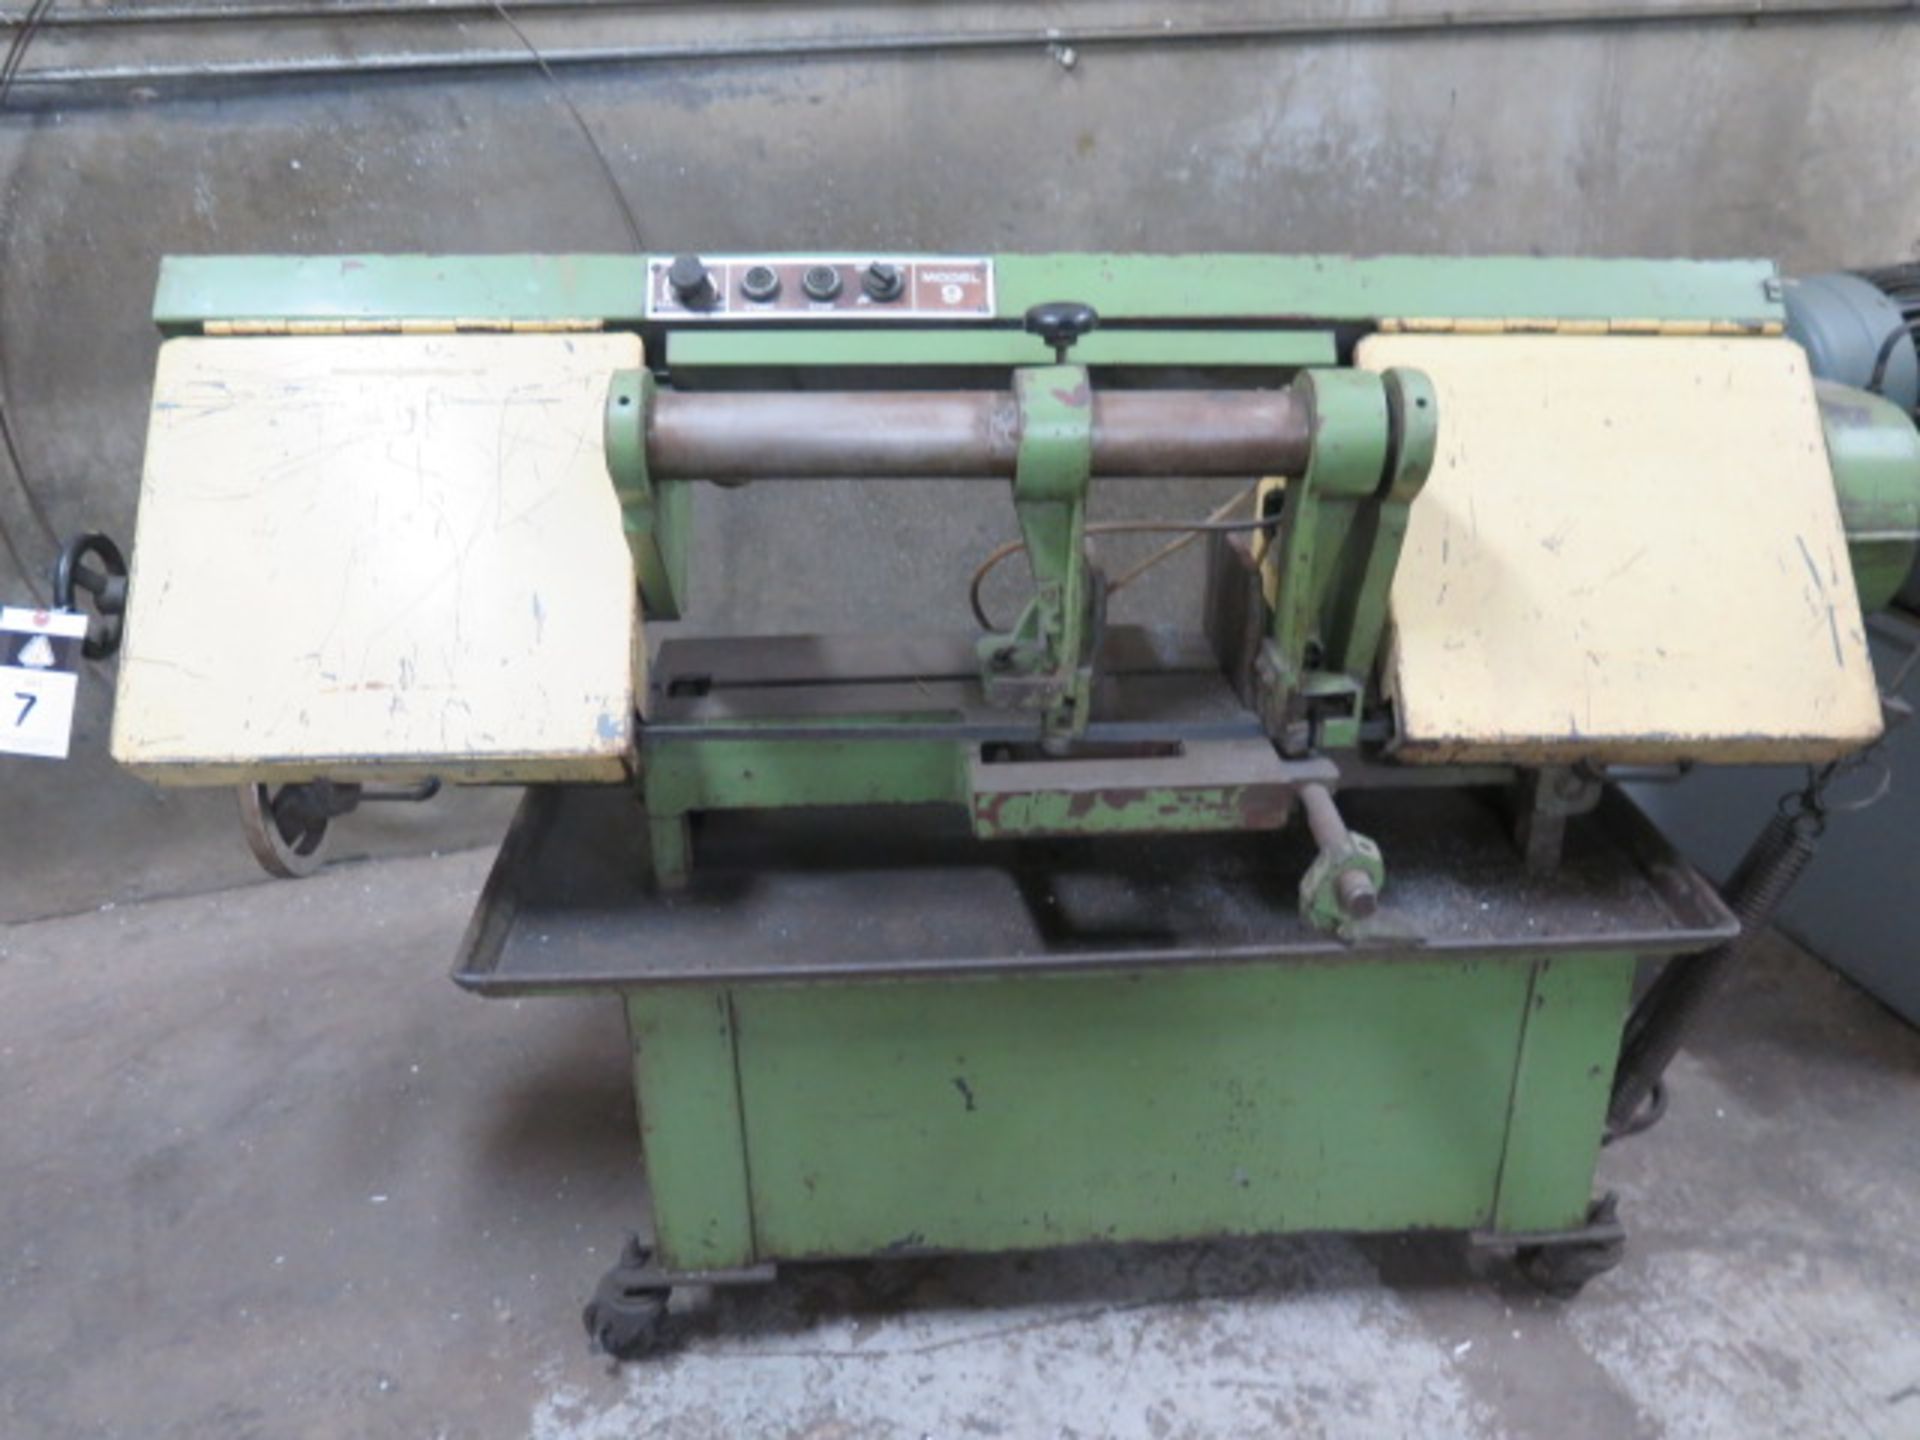 Import mdl. 9 9” Horizontal Band Saw (SOLD AS-IS - NO WARRANTY)